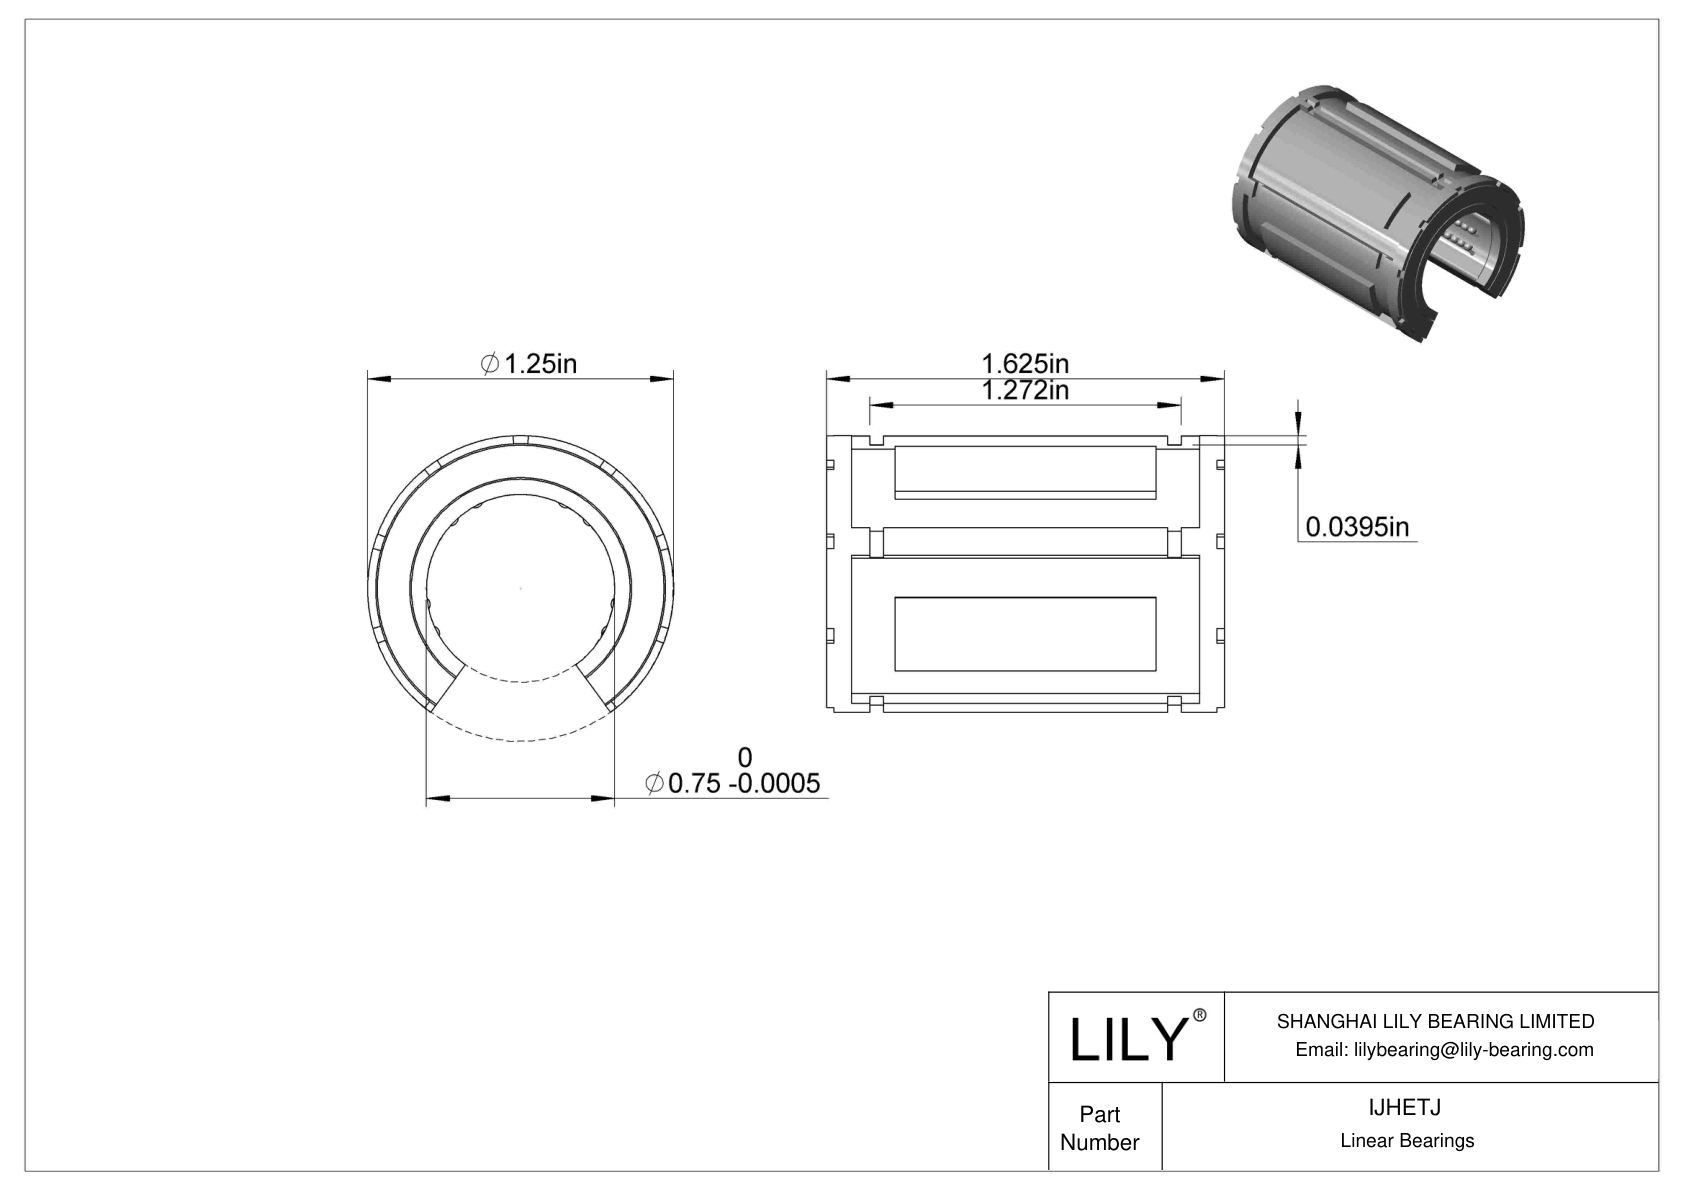 IJHETJ Common Linear Ball Bearings for Support Rail Shafts cad drawing